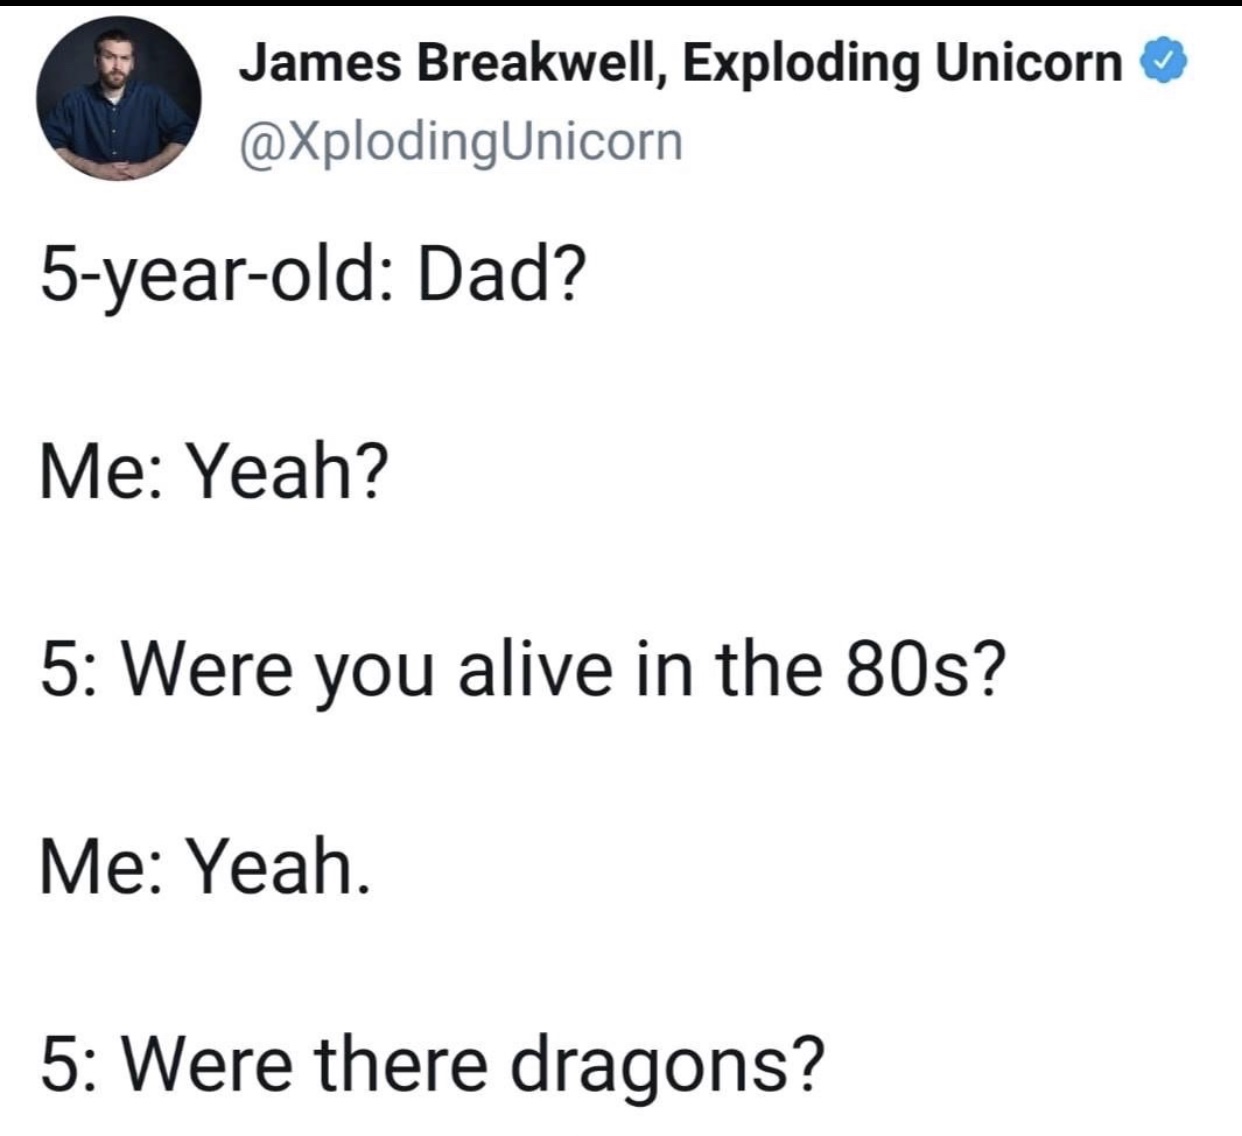 angle - James Breakwell, Exploding Unicorn 5yearold Dad? Me Yeah? 5 Were you alive in the 80s? Me Yeah. 5 Were there dragons?